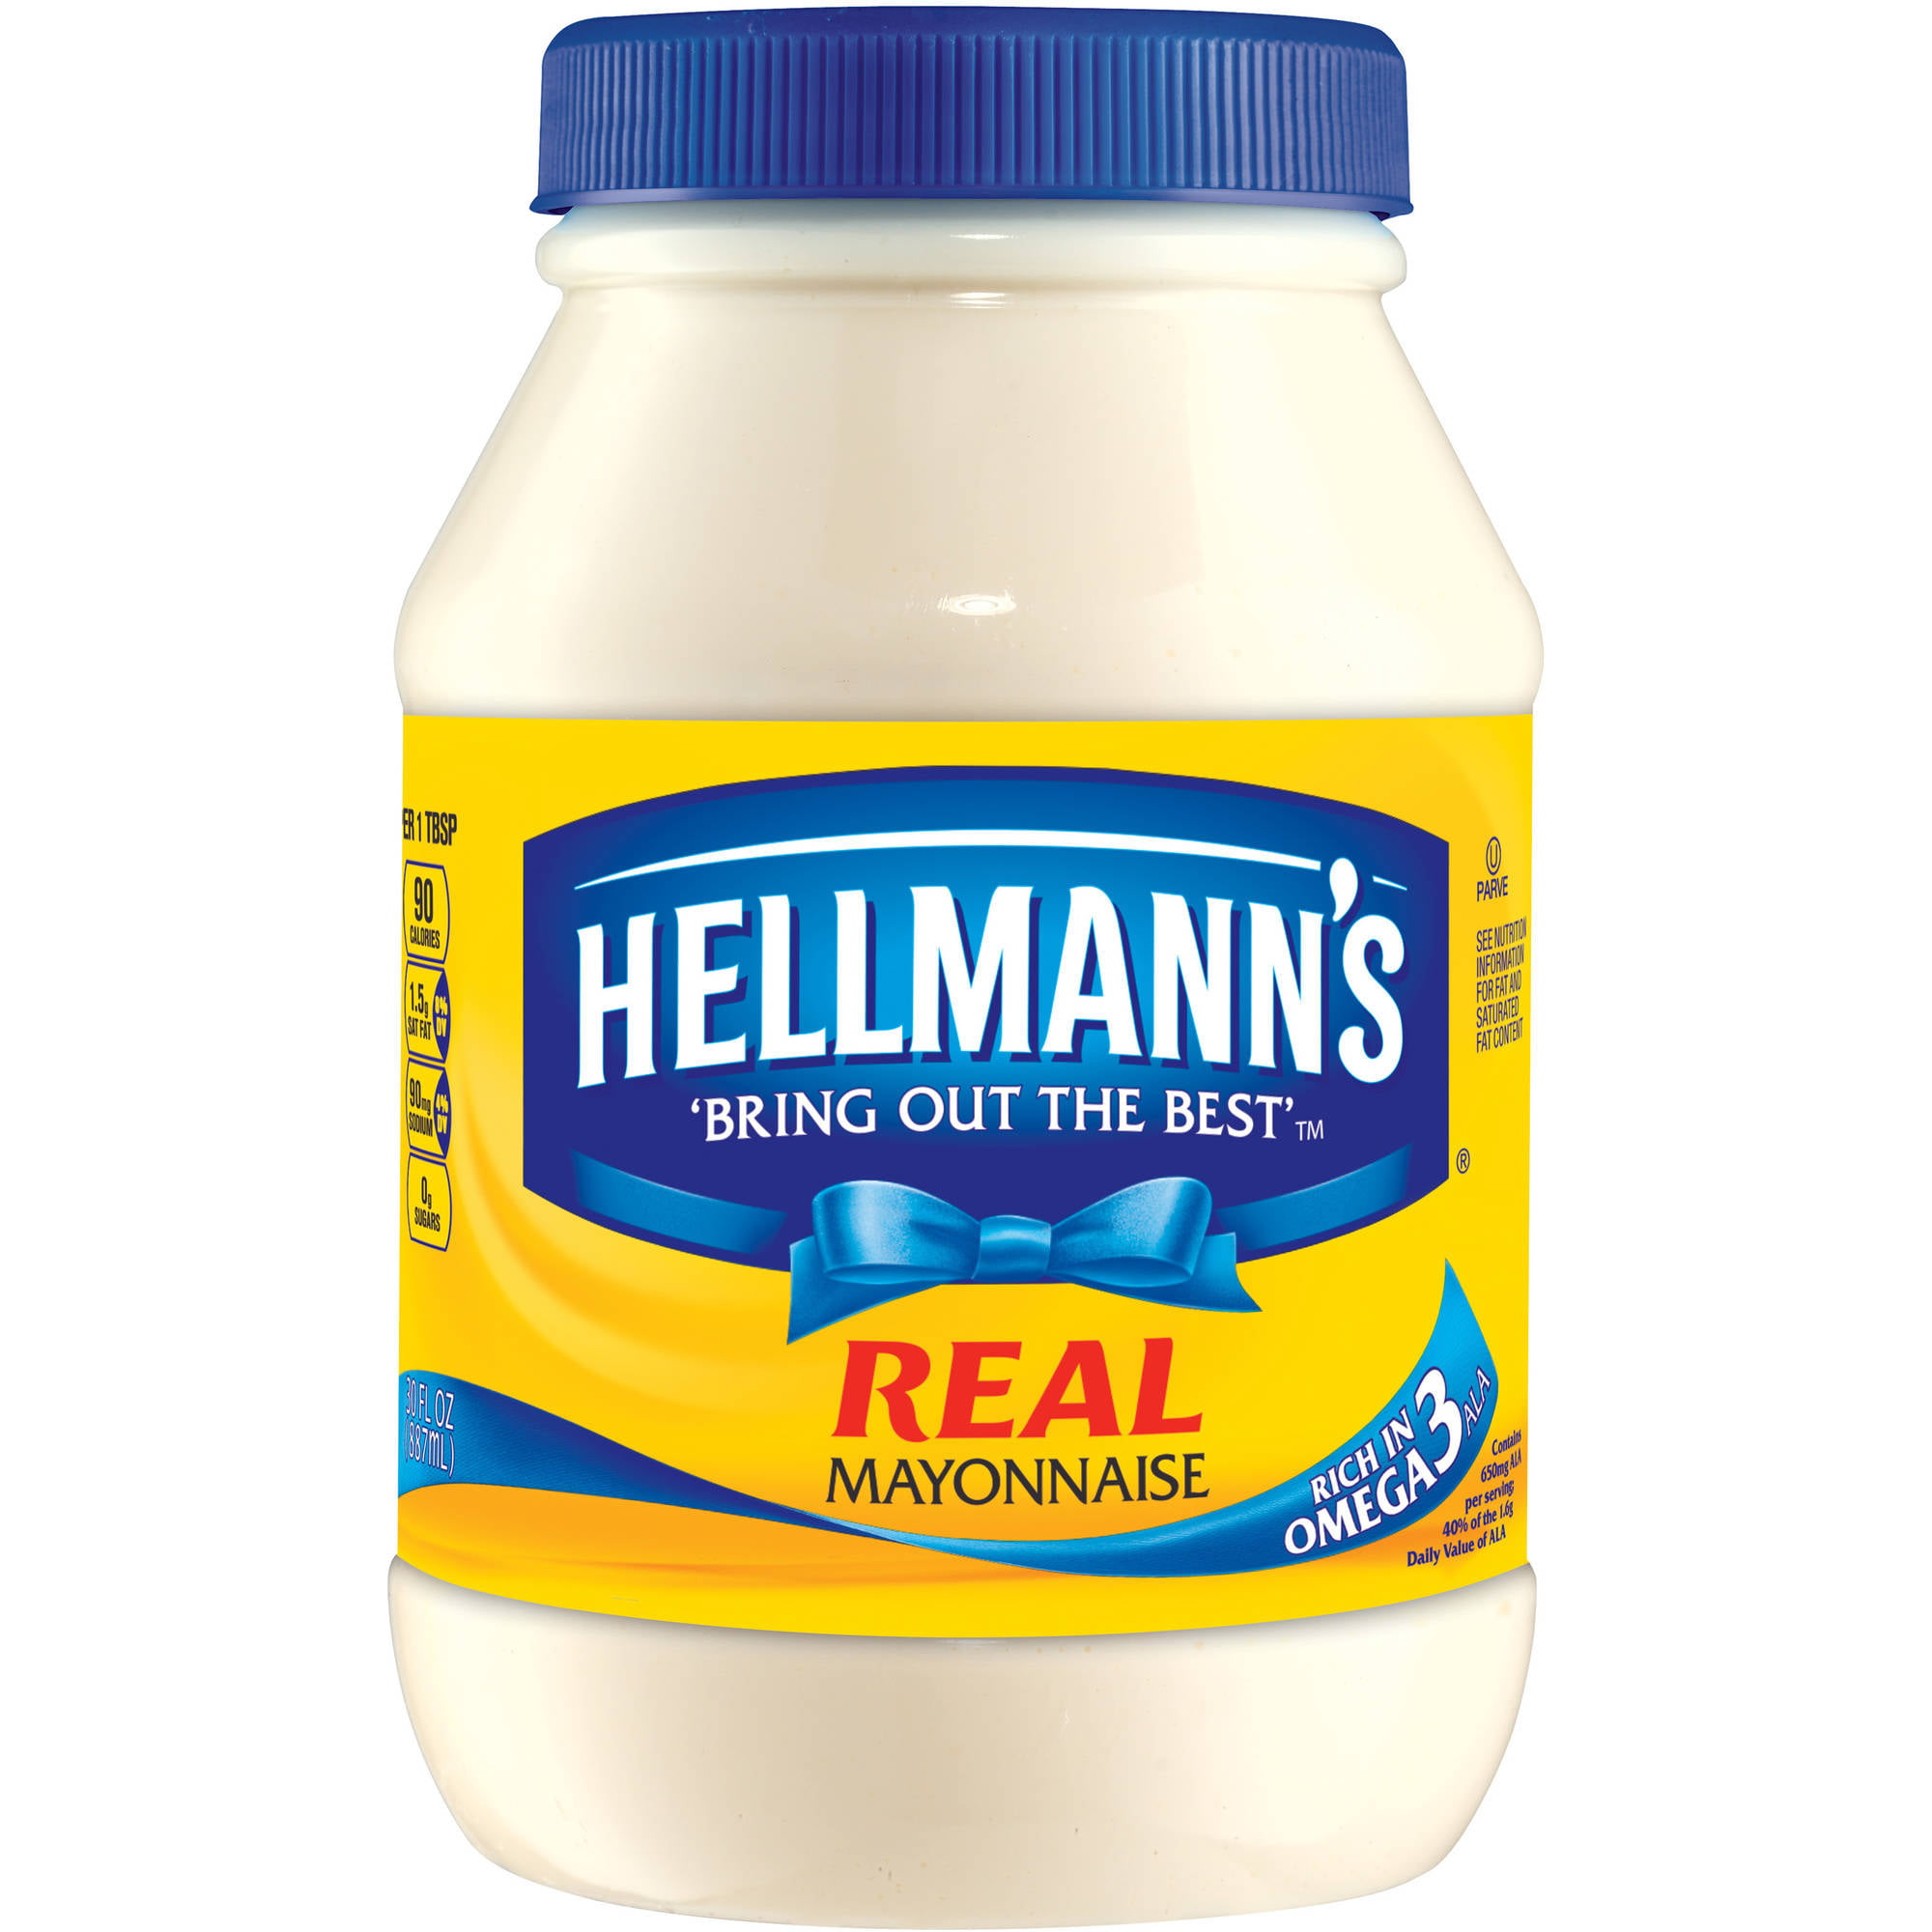 Image result for hellmanns mayo images